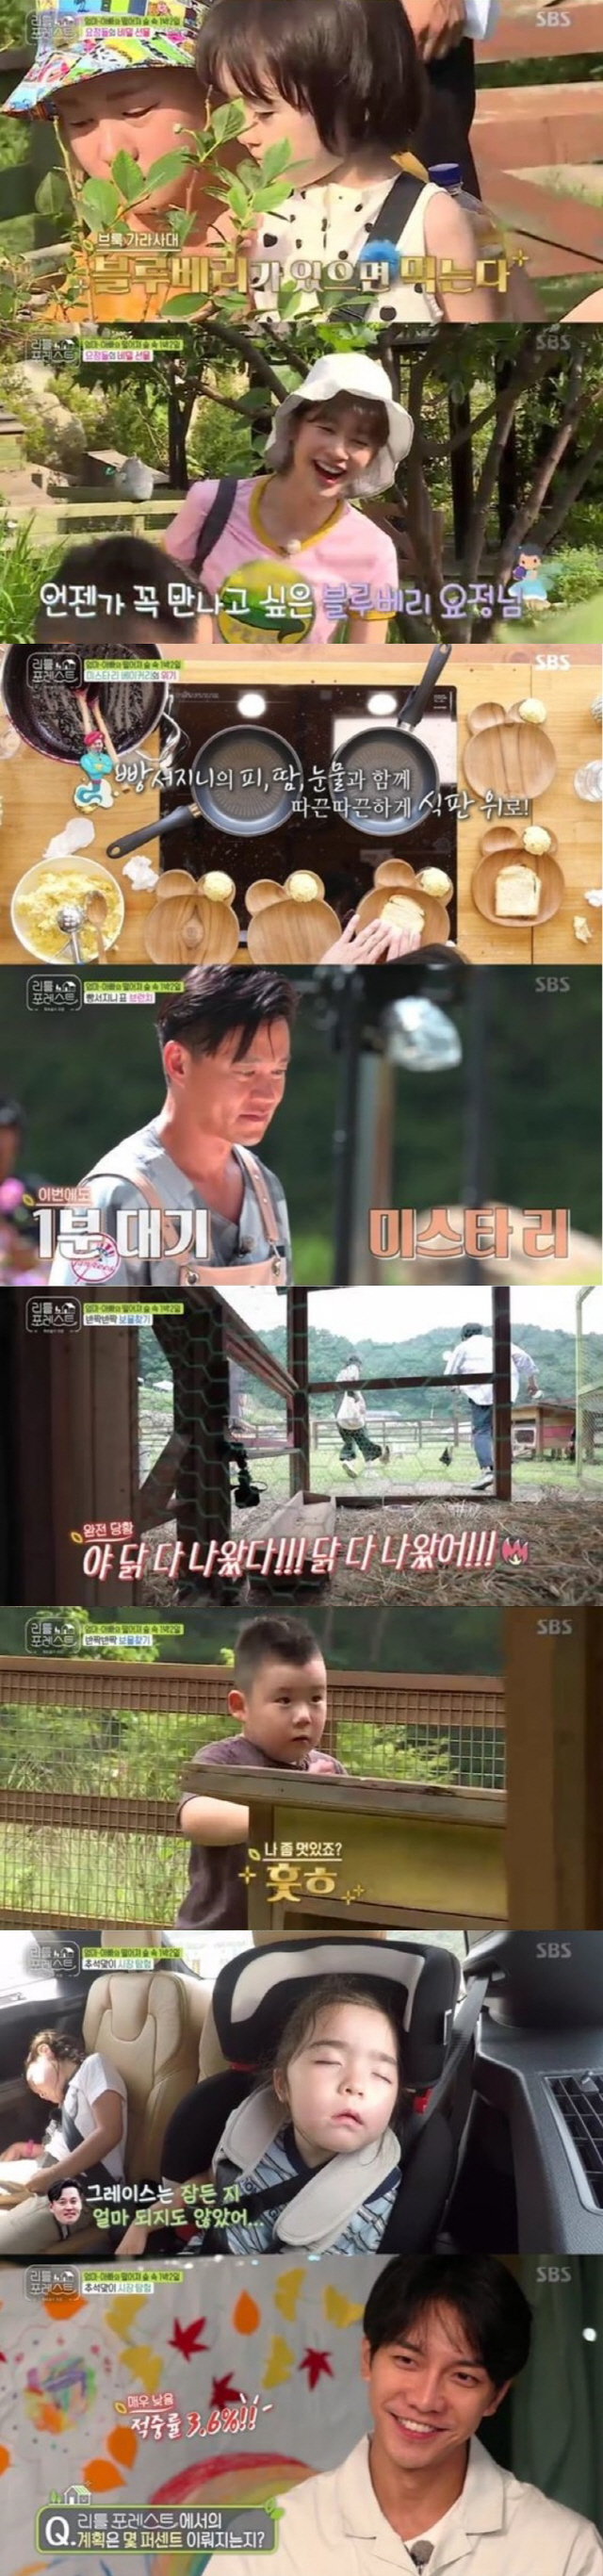 SBS Wall Street entertainment Little Forest soared to 5.3% of the highest audience rating per minute.In Little Forest broadcast on the 16th, the members were drawn to the struggle for Little.The members who finished their first camping with Little Eats last week decided to plant blueberry trees at night without Little.Gag Woman Park Na-rae and Actor Jung So-min planted a huge blueberry tree, and Little people stimulated the curiosity of the children, saying, The fairy came and planted.Actor Lee Seo-jin challenged Making Misari Table Bread. As it is Main Chef, everyone received the expectation of the main Chef, and failed in the early days, but eventually made handmade bread.In addition, Park proposed The Treasure Seekers play.The members hid the Treasures all over the place, and the little people gathered together to say given gifts and laughed.Children who visited animal farms during the The Treasure Seekers entered the members and the Chicken coop, and in the process, the Chickens escaped.Park, who had a Chicken phobia in a sudden sudden situation, was scared and took the children to the end, and Lee Seung-gi-gi Gi and Lee Han finished the situation firmly.The scene rose to the highest audience rating of 5.3% per minute, taking the best one minute.The most difficult Treasure-hunting place was Lee Seo-jin, who gave away the Treasure for Brook, who hid himself for more thrilling Treasure-hunting but did not find much Treasure.On the other hand, Little Lee decided to go on his first long-distance outing market outing at Lees suggestion, all of them were excited, but by the time they arrived at the market, they were asleep.Lee Seung-gi-gi-gi was embarrassed by the unexpected situation, saying, The plan hit rate is 3.6%.Little Forest airs today (17th) at 10 p.m.